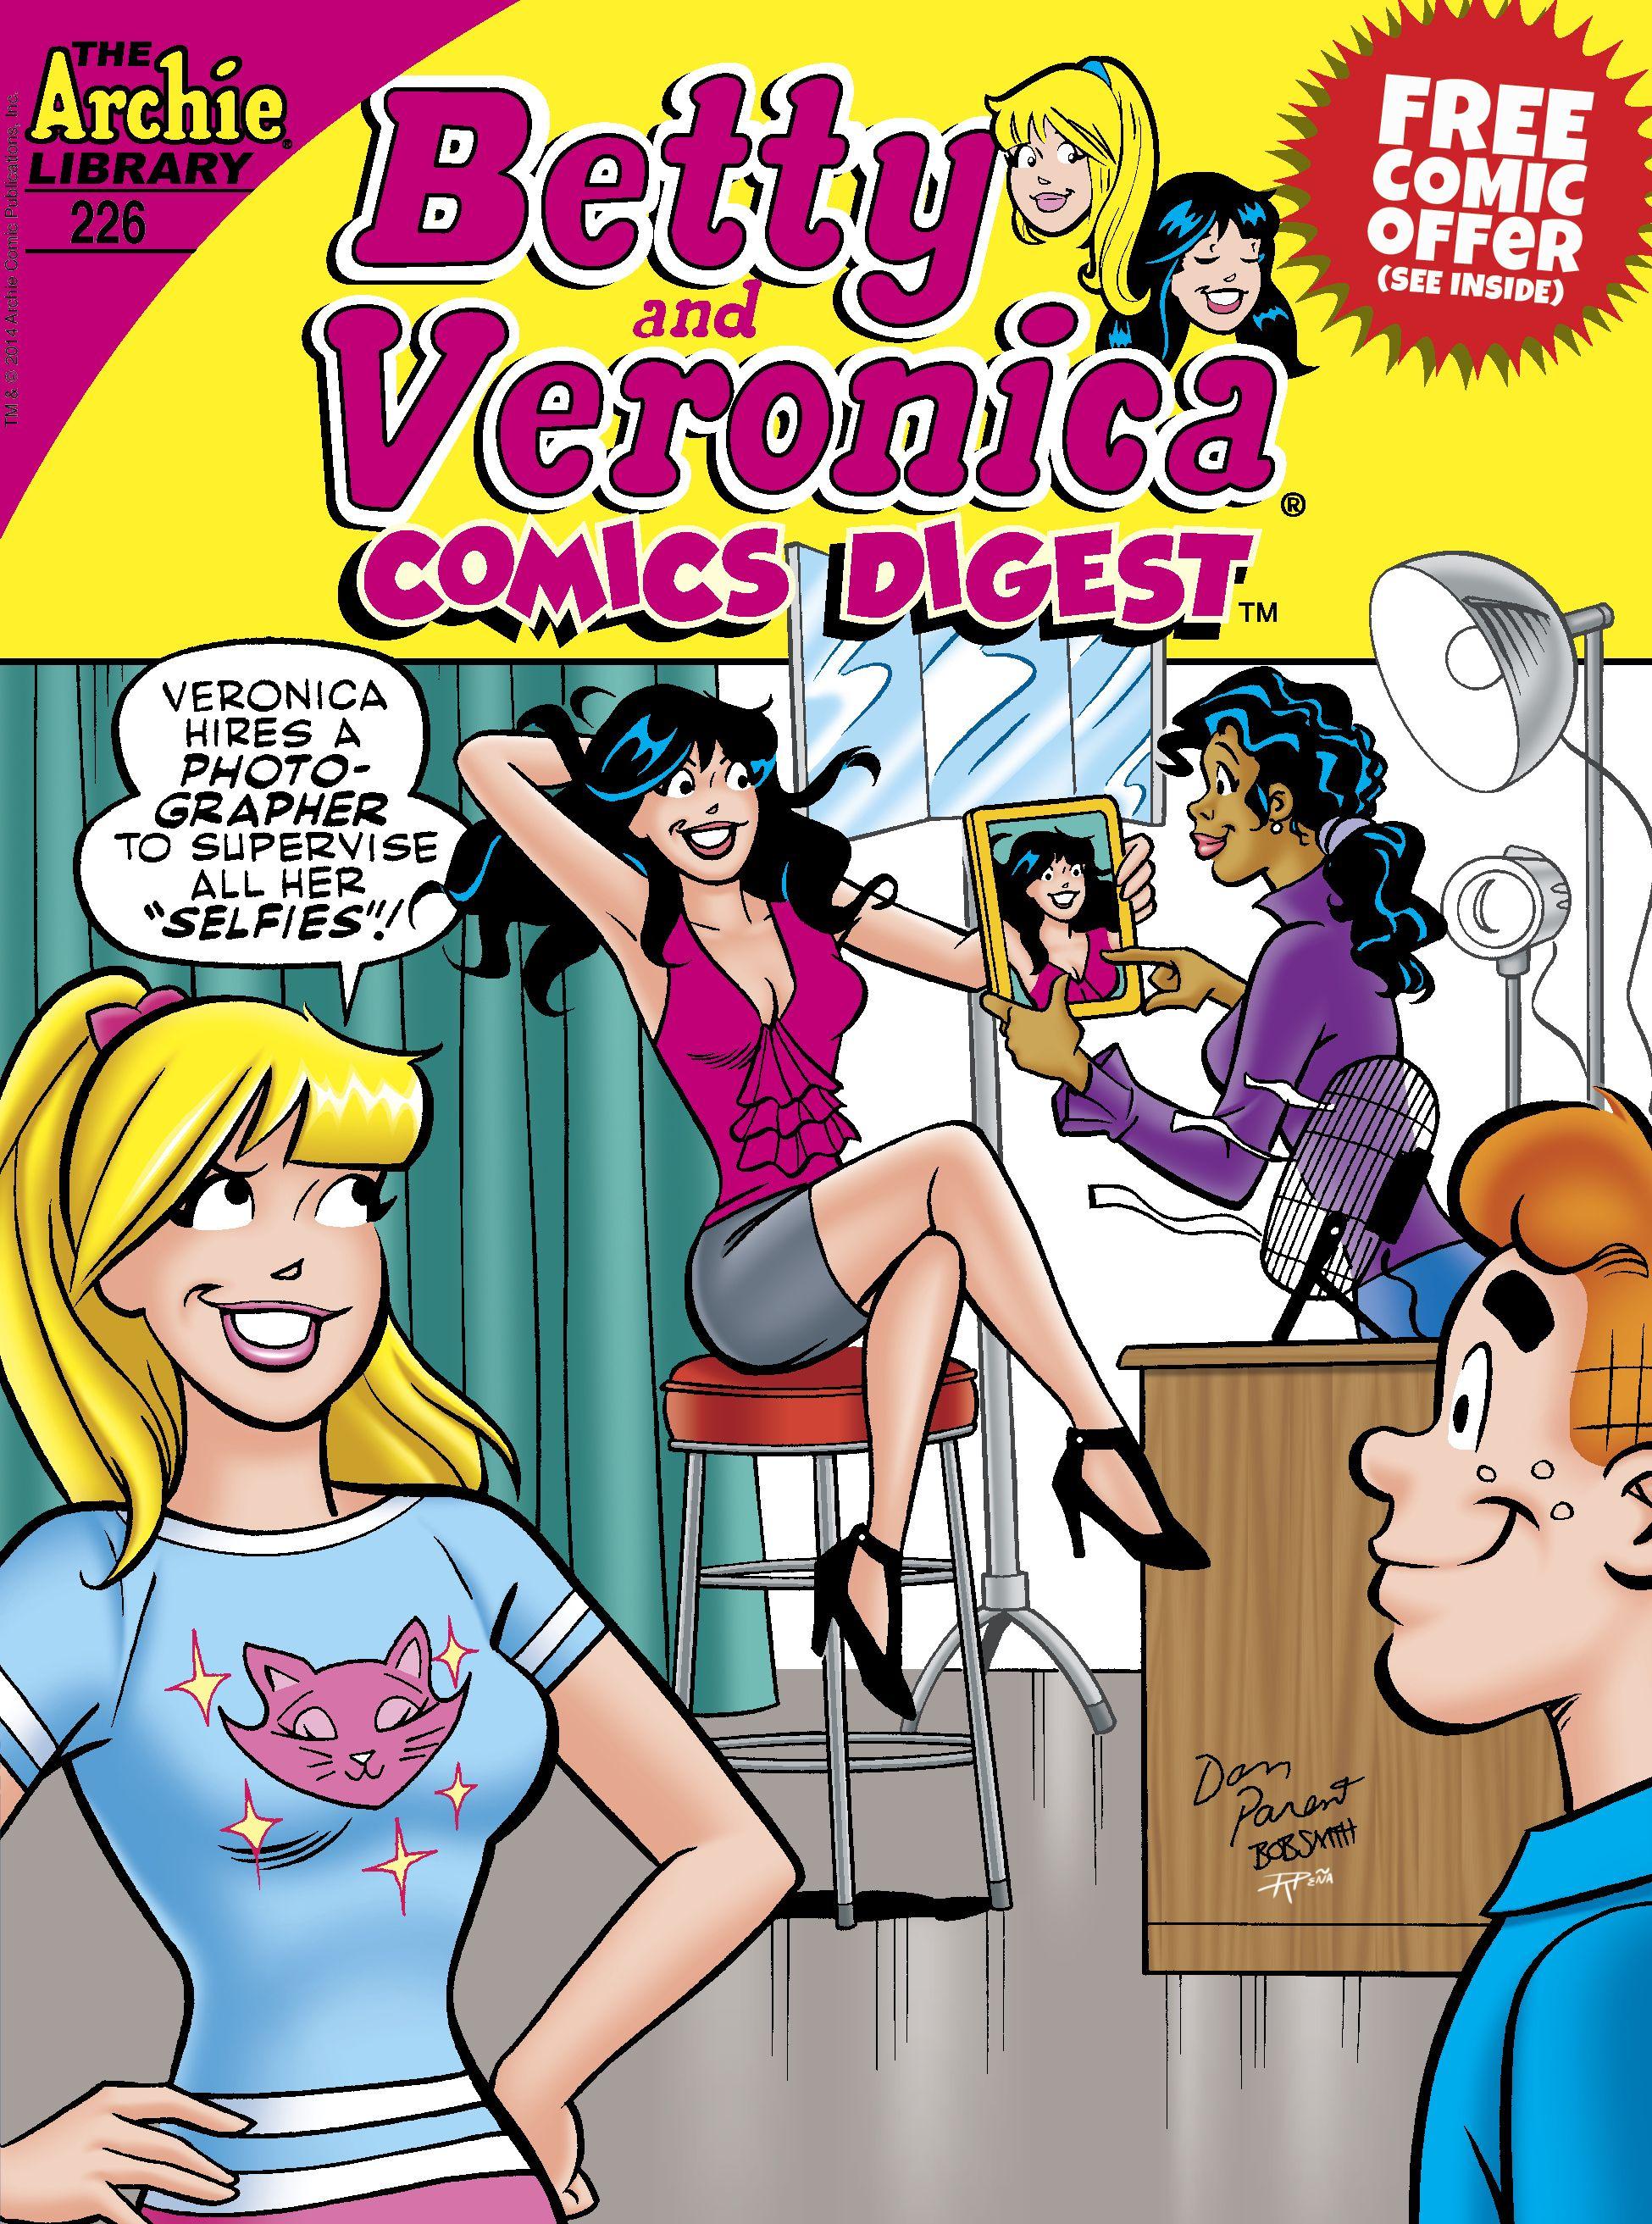 Archie Comics August 2014 Covers and Solicitations Book